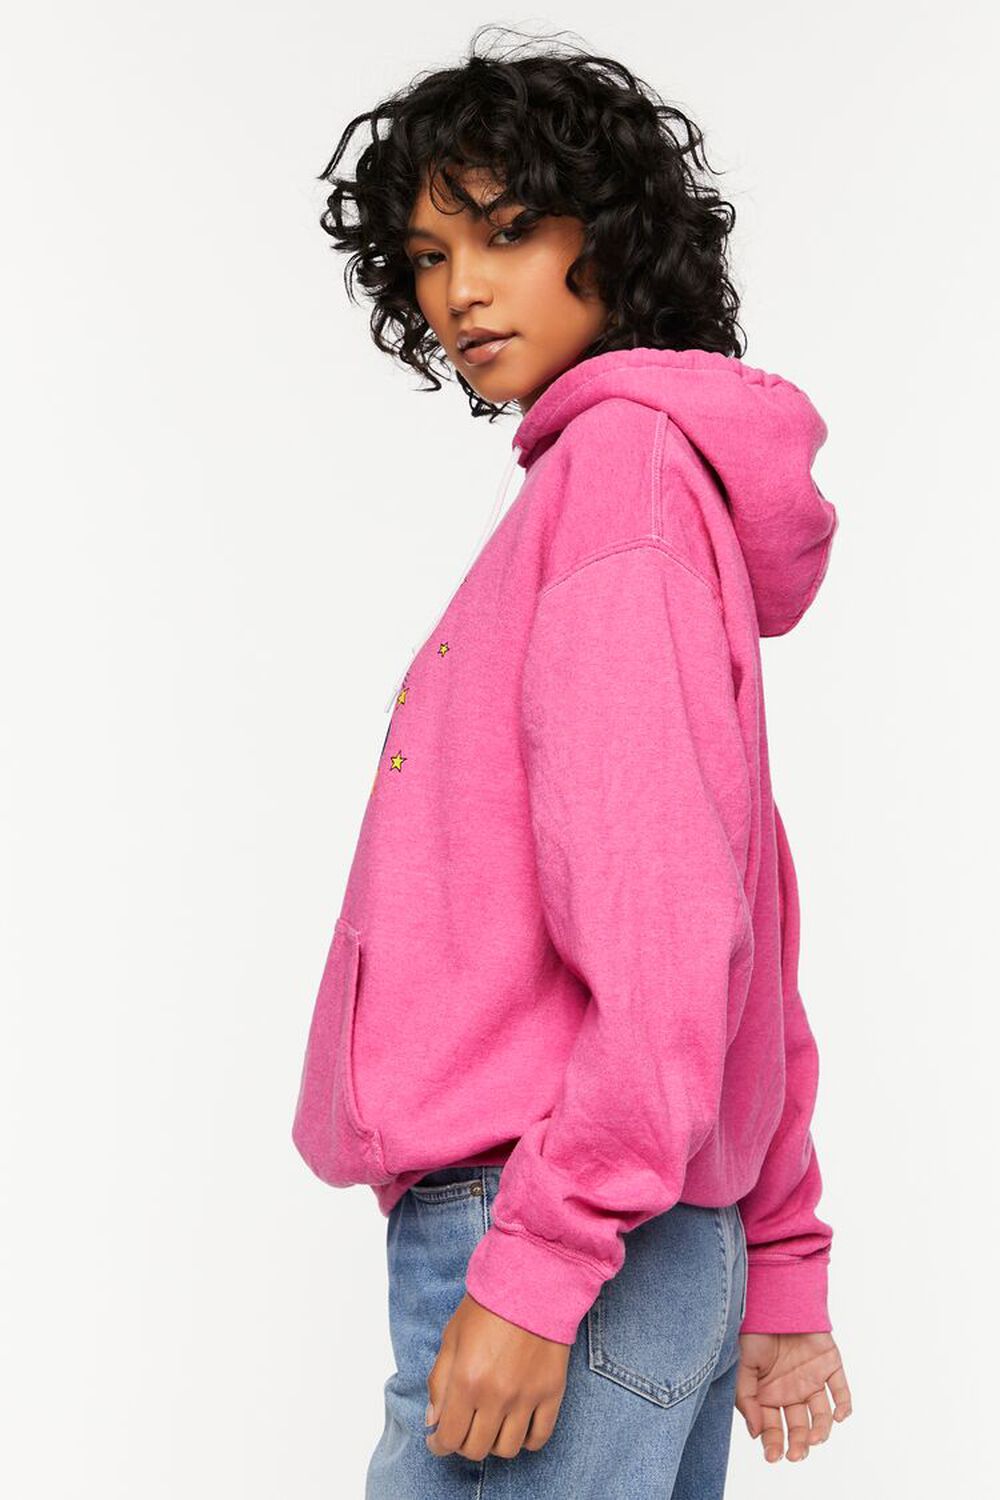 Forever21: Sailor Moon Pink Graphic Hoodie